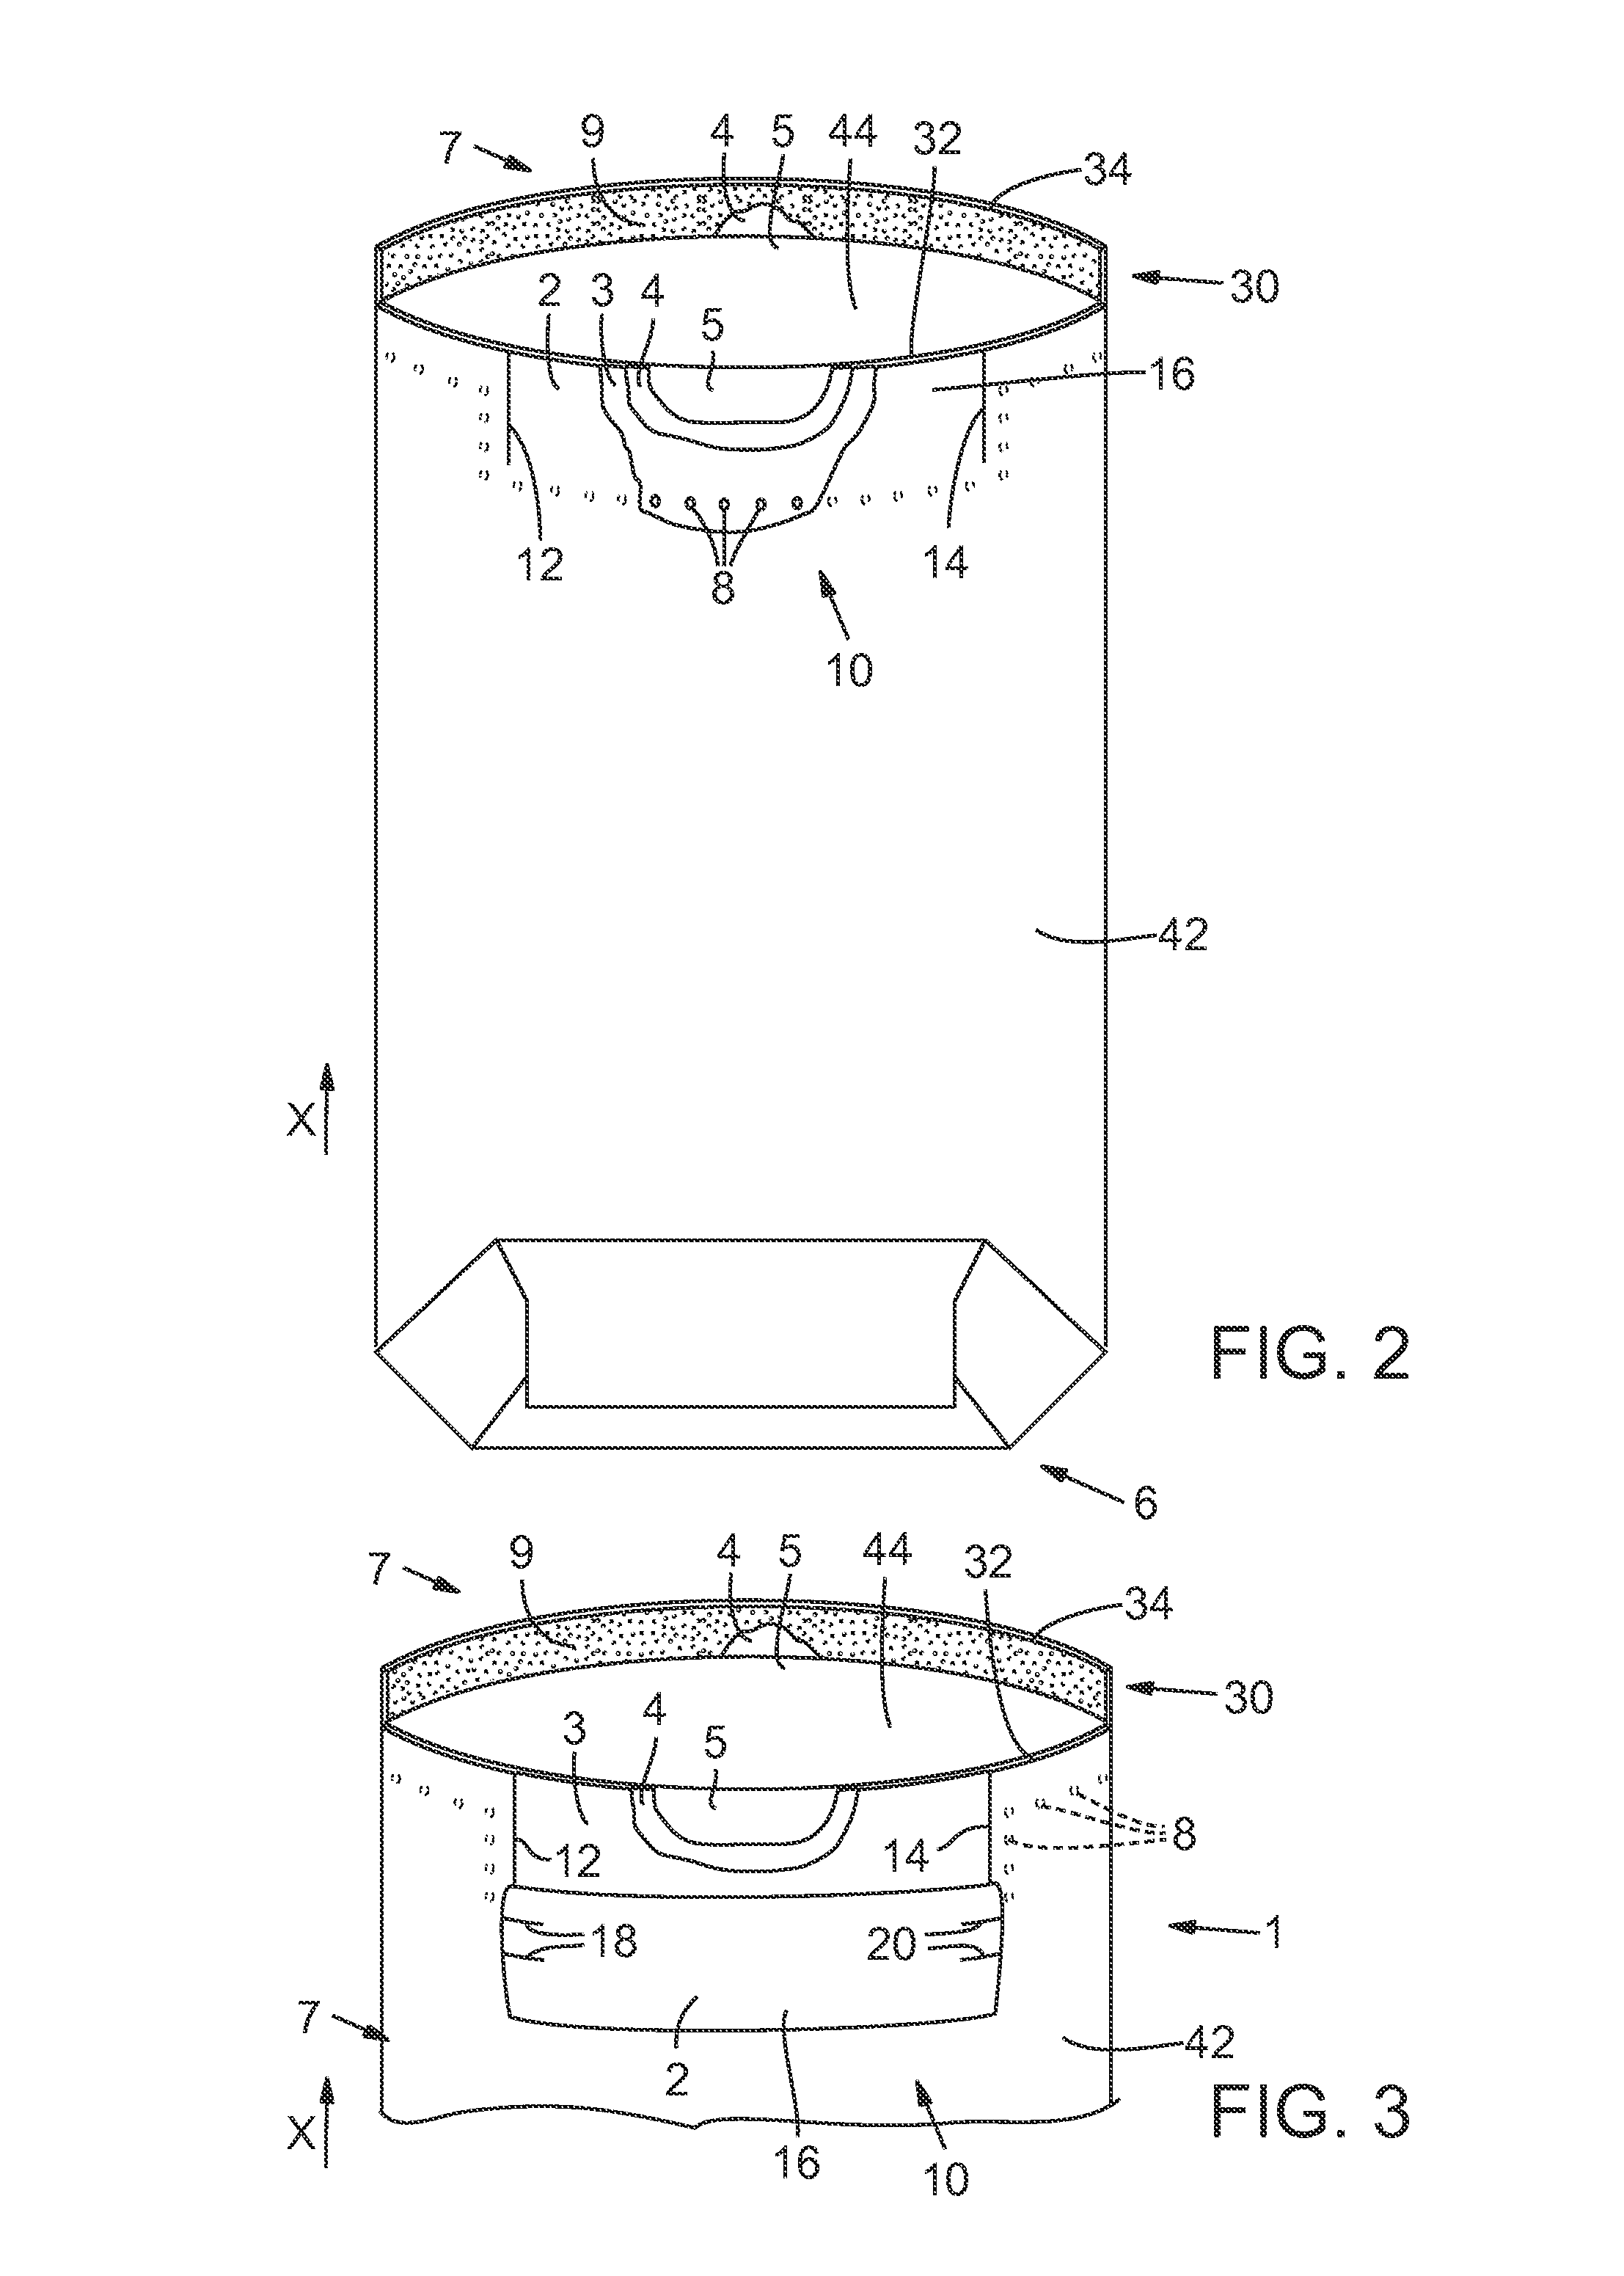 Easy Open Apparatus and Method for Multi-Ply Bags